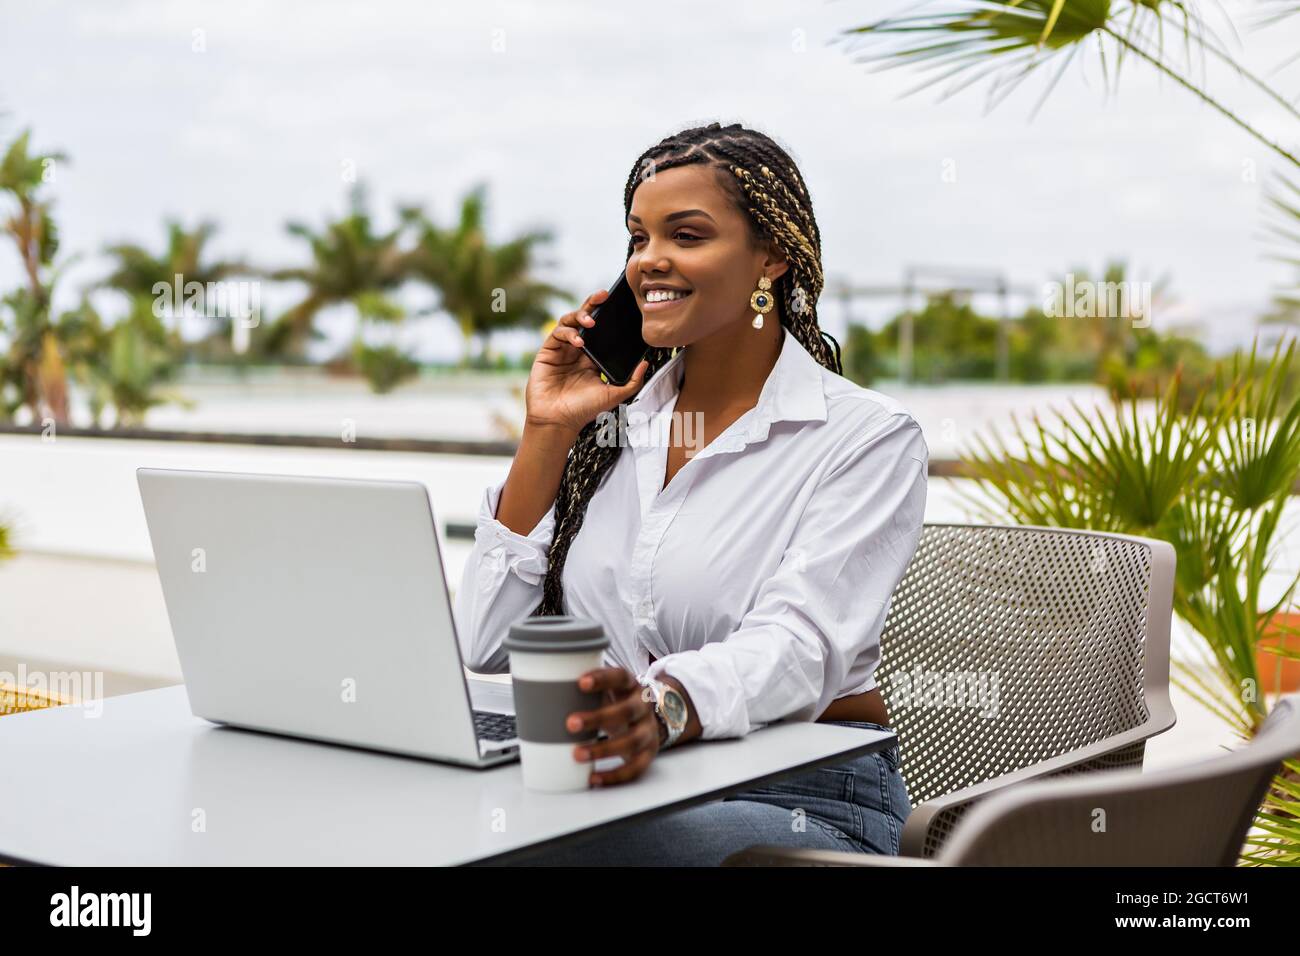 Cheerful African American woman with her laptop talking with cellphone while holding cup of coffee in a cafe outside. Woman with braids sitting using Stock Photo